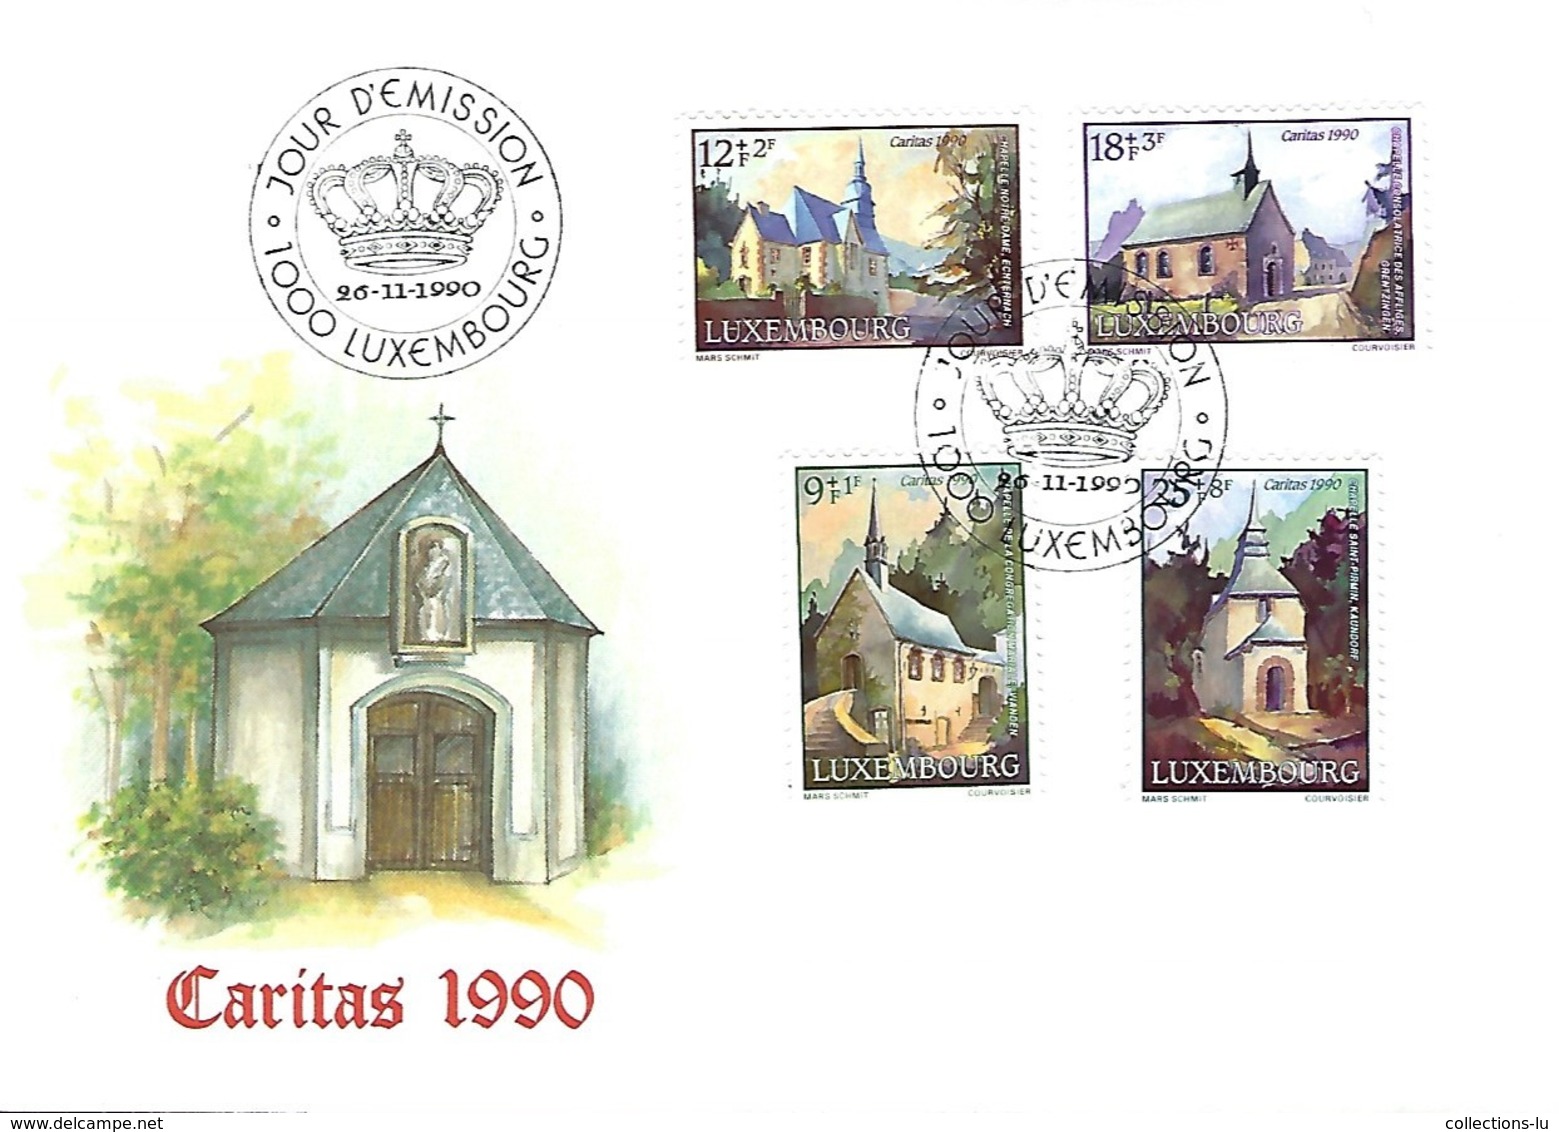 LUXEMBOURG  -  FDC   26.11.1990   Timbres Caritas  1990 - FDC